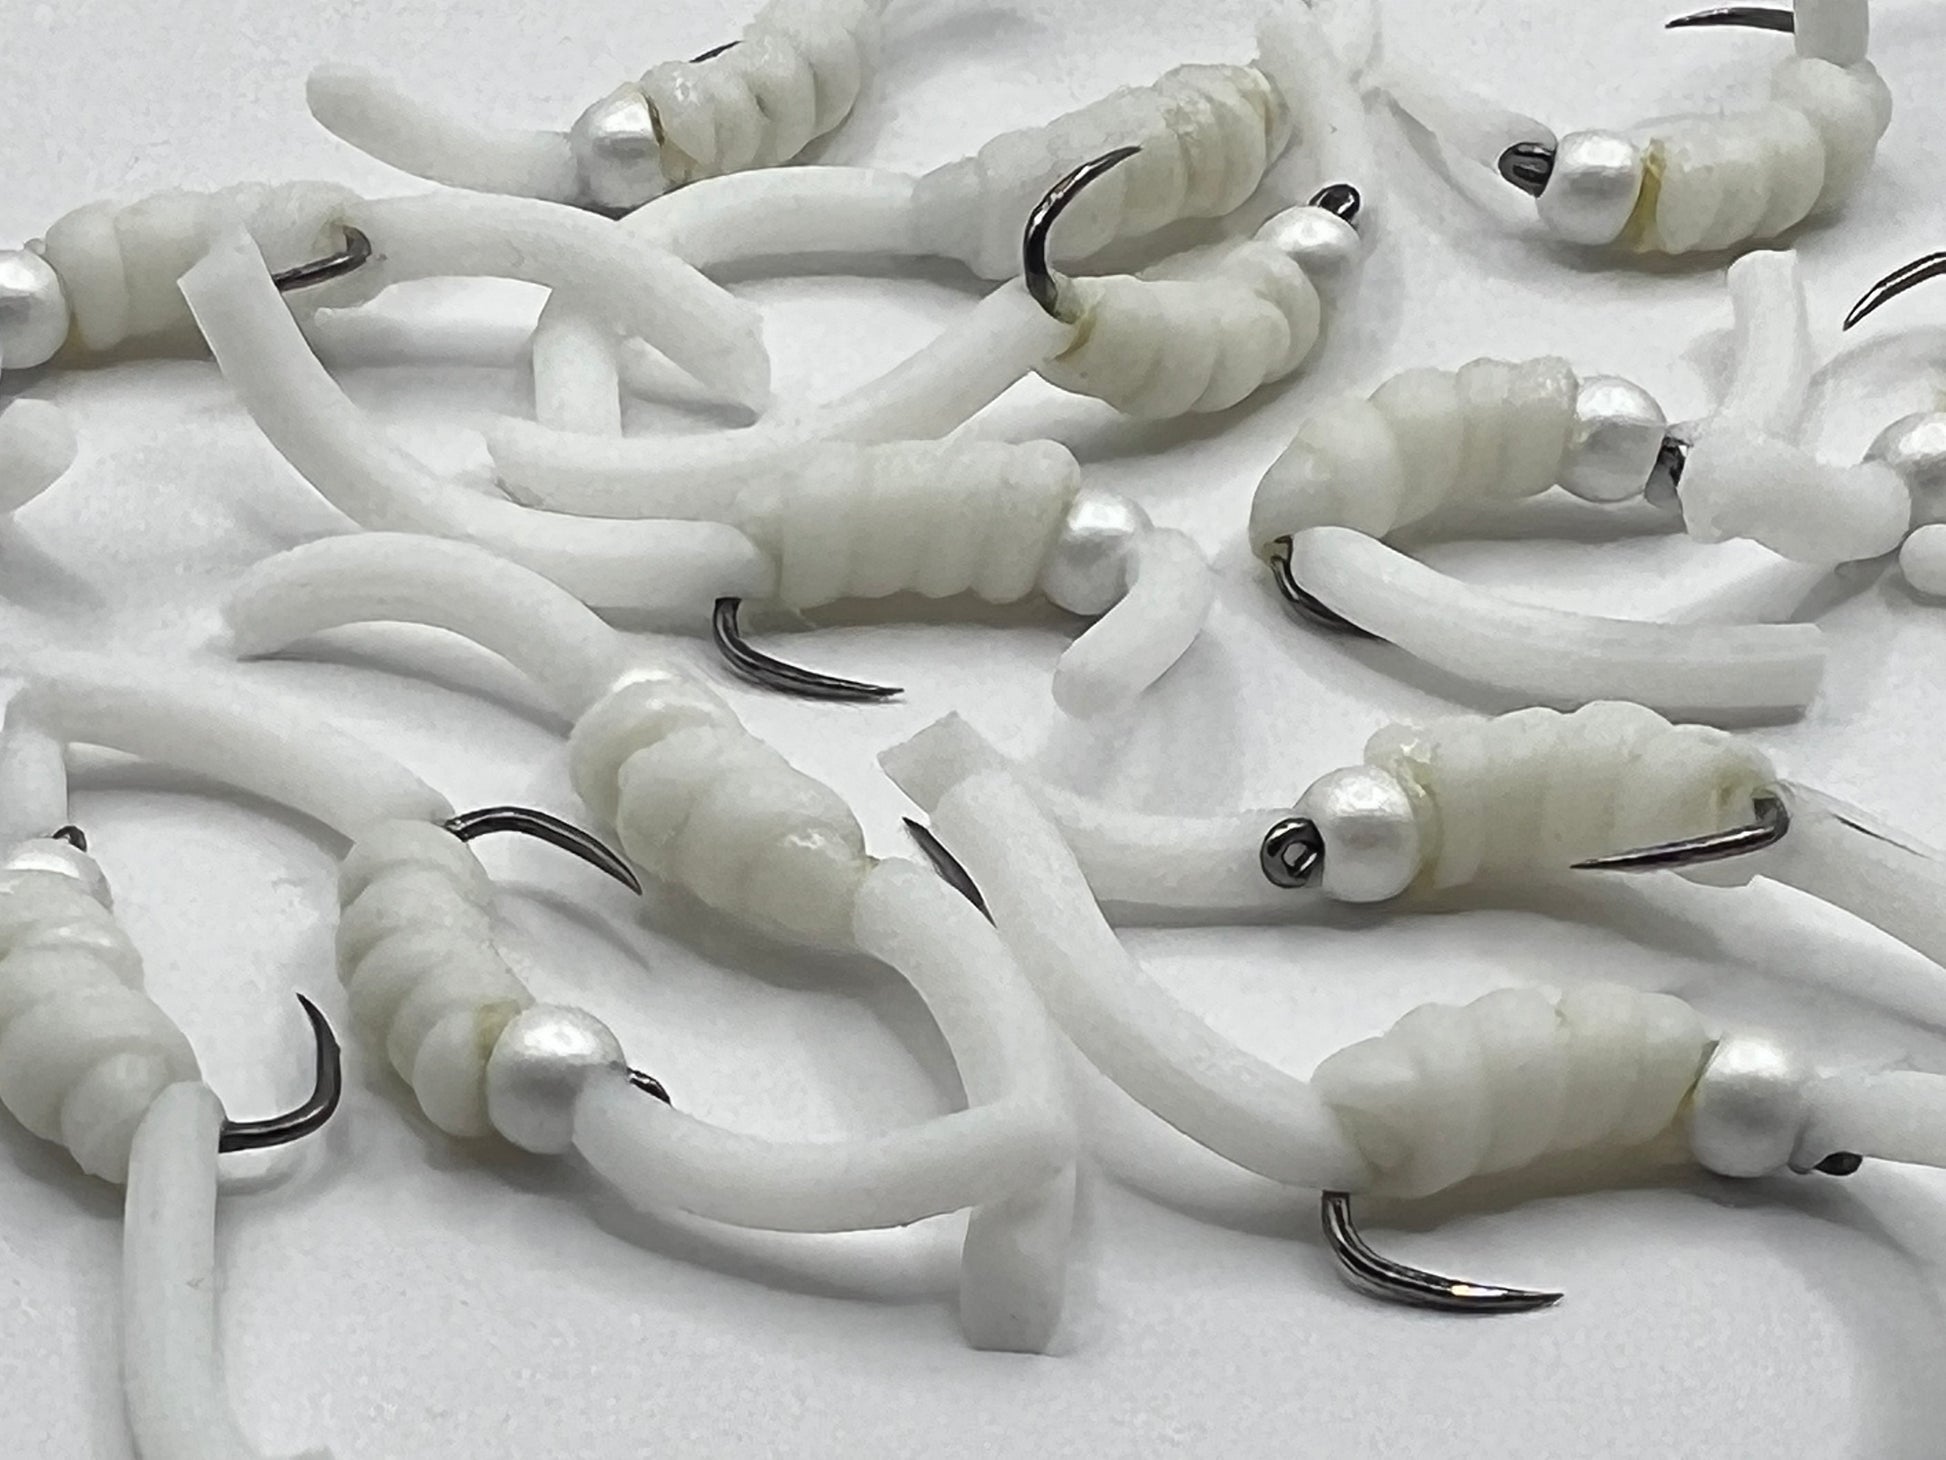 White squirmy worms